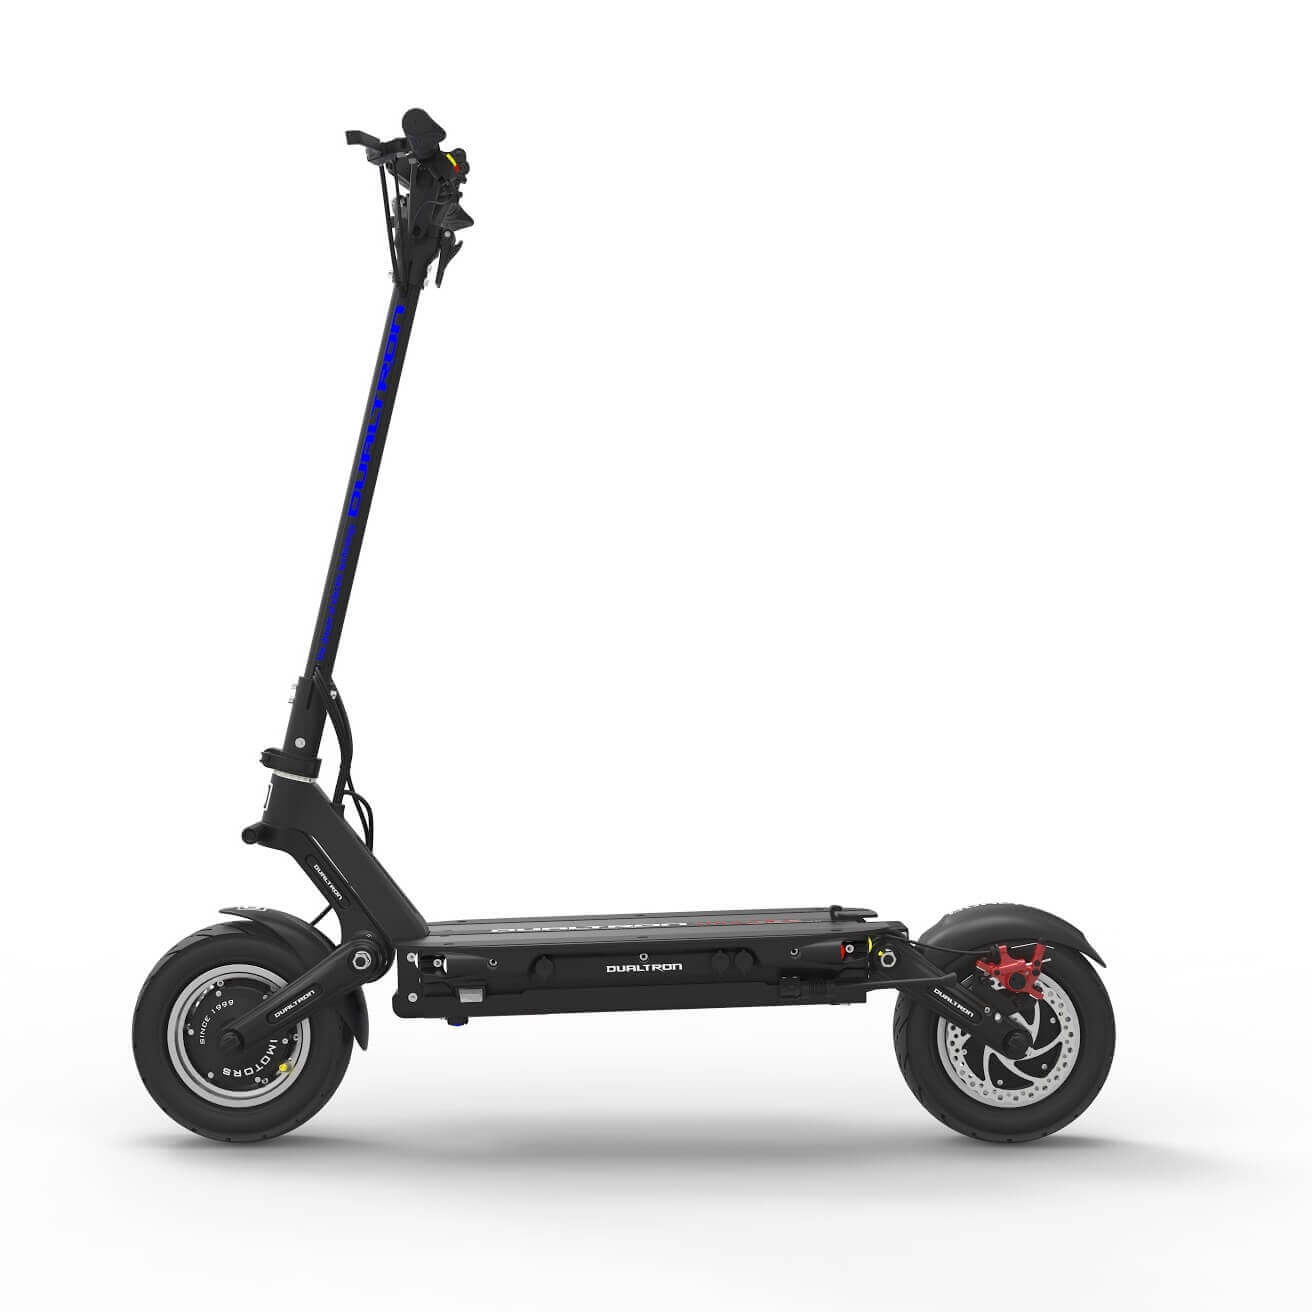 1-yr US Warran Max Speed 40+mph 60V 2072Wh Battery 5400W Peak Power Dual Motor Dualtron Thunder High Speed Electric Scooter for Adults 80 Miles Distance Climbing Grade 30° 